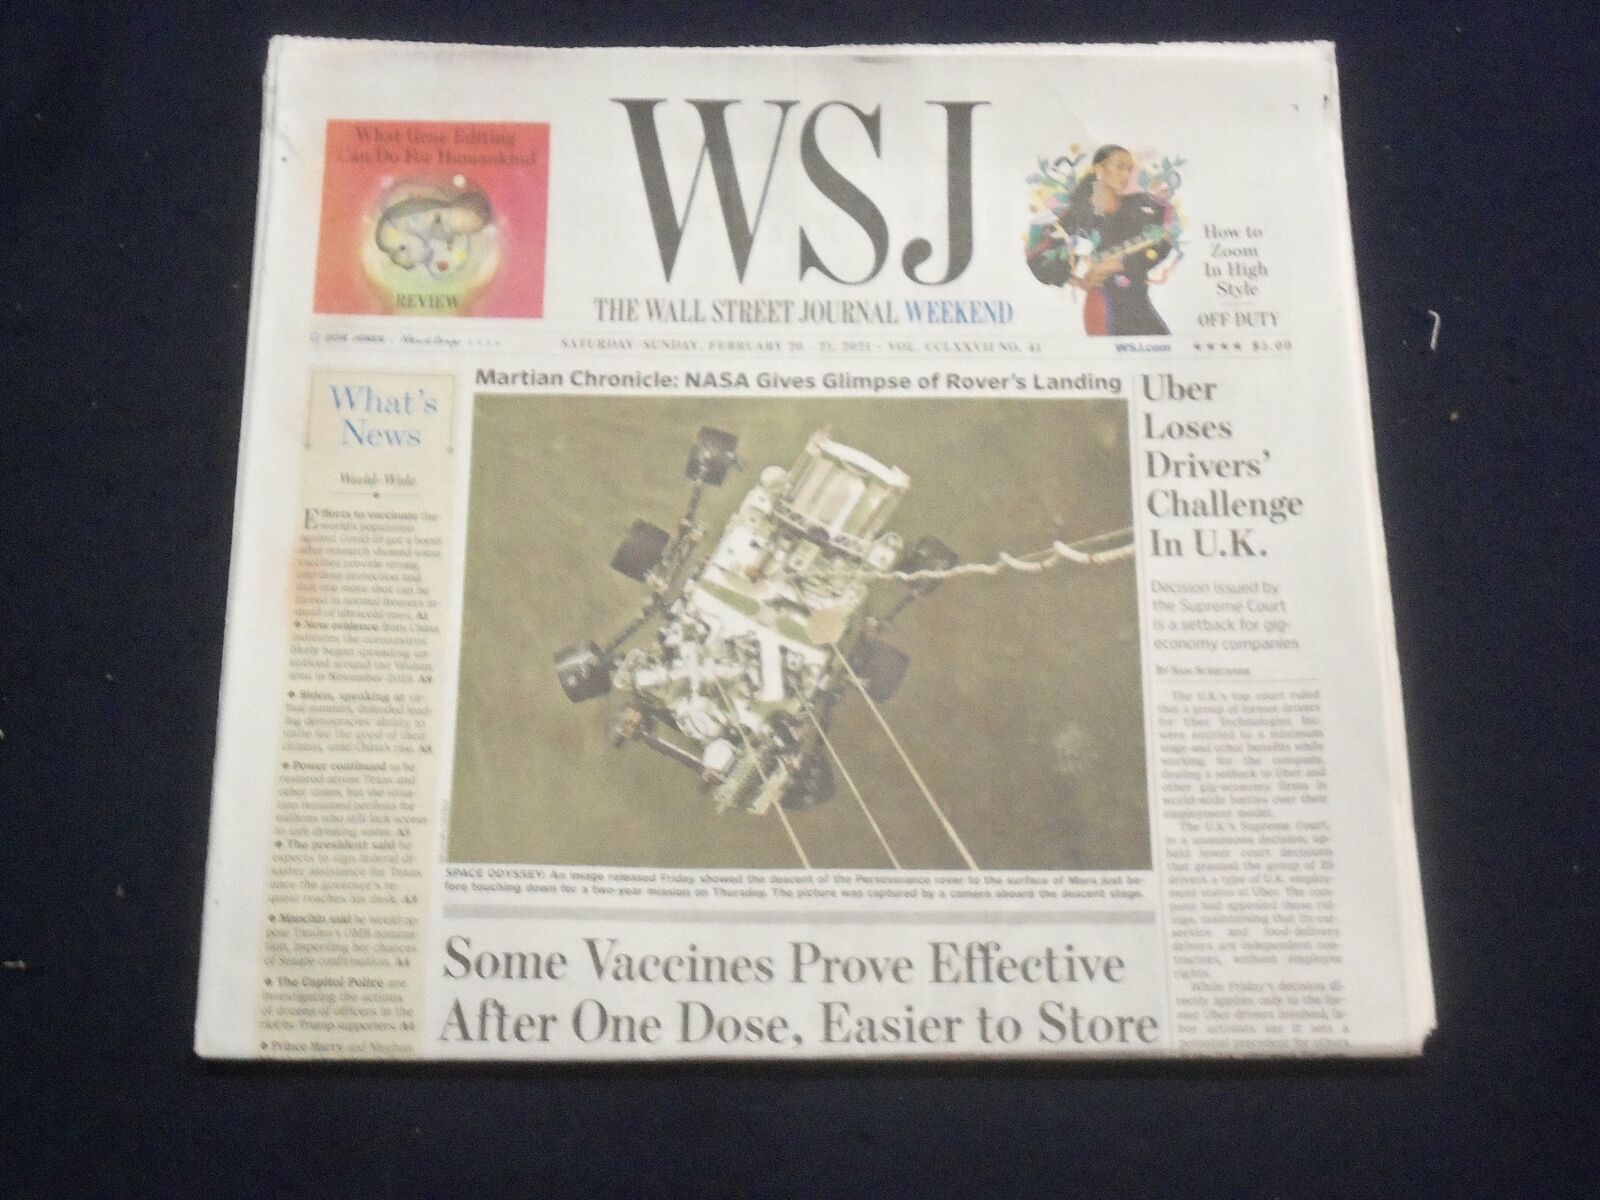 2021 FEBRUARY 20-21 THE WALL STREET JOURNAL - VACCINES EFFECTIVE AFTER ONE DOSE